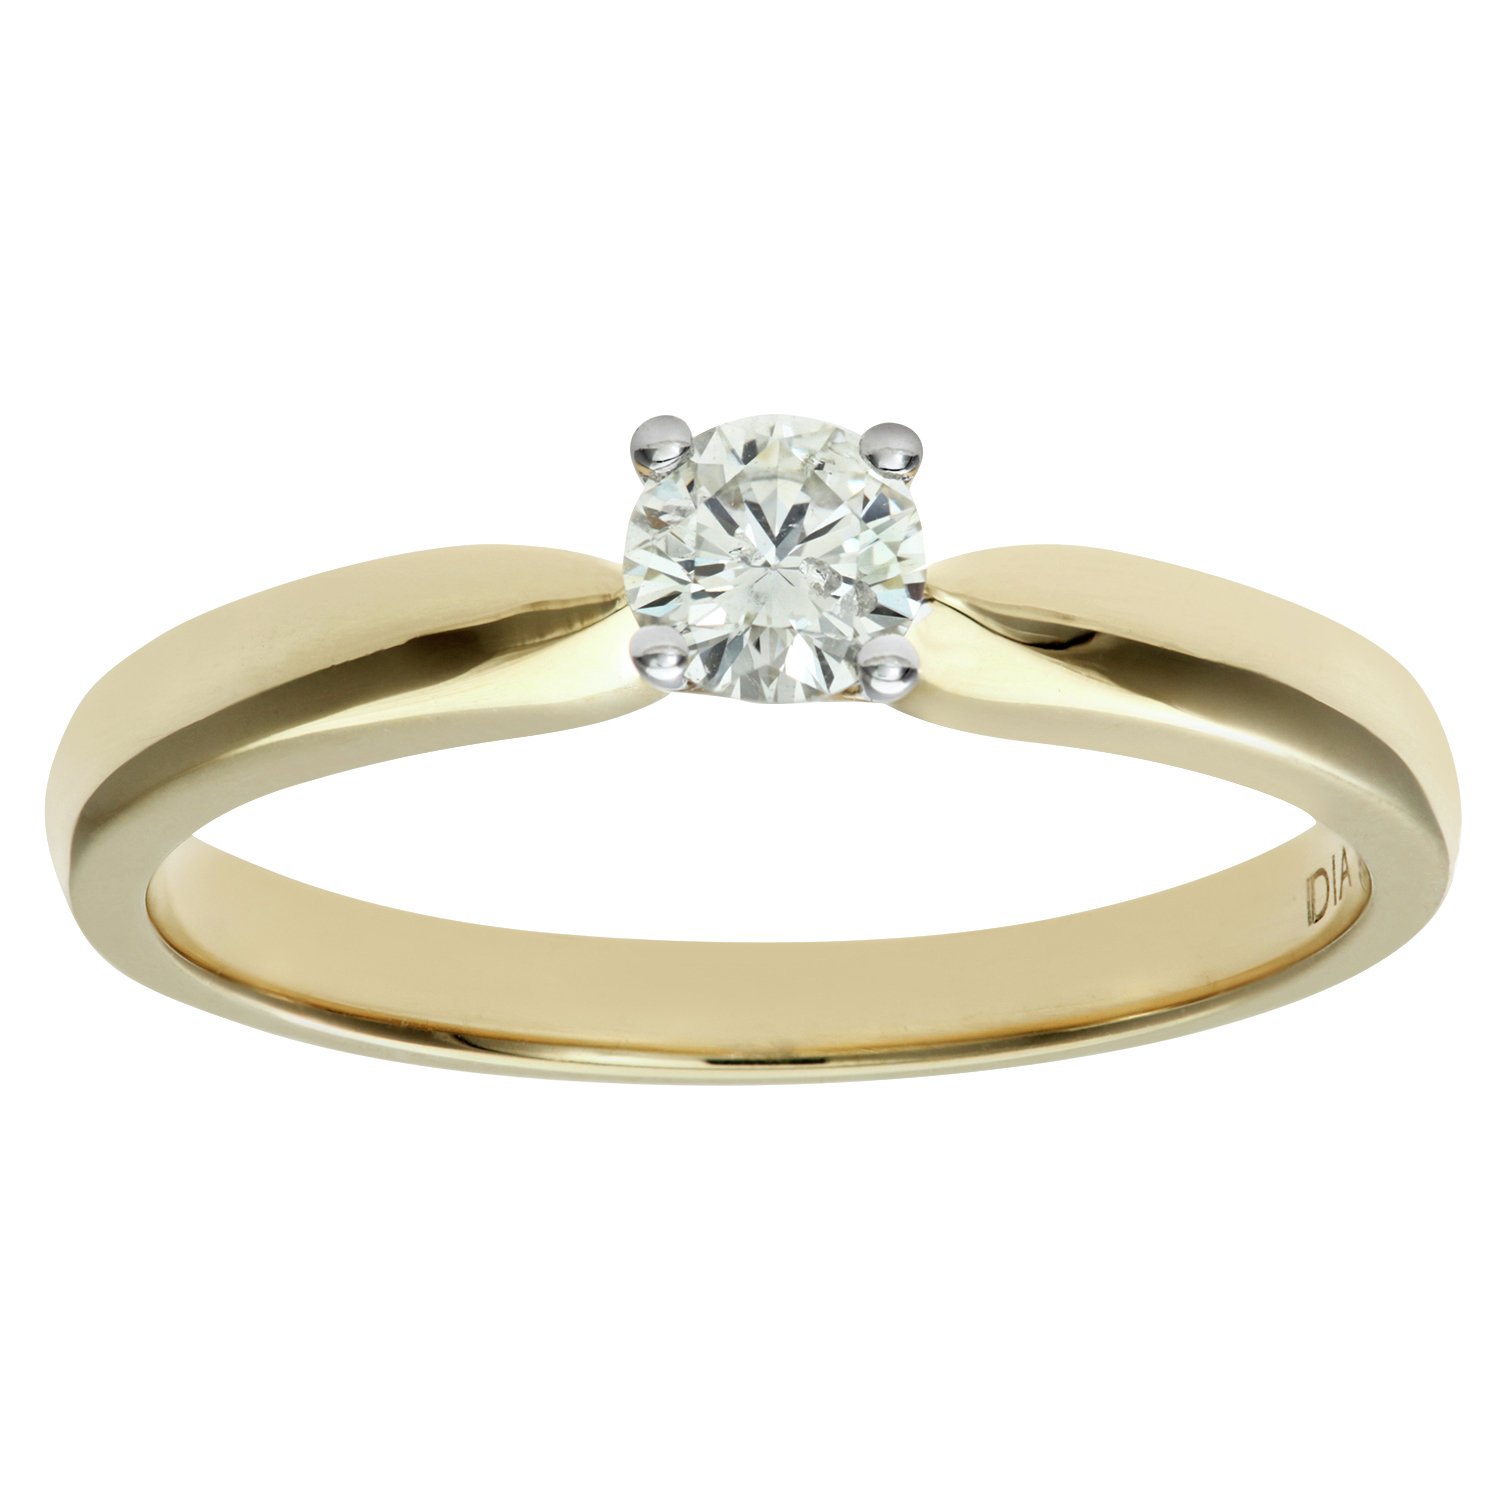 Everlasting Love 18ct Gold 0.25ct Solitaire Ring - Size M